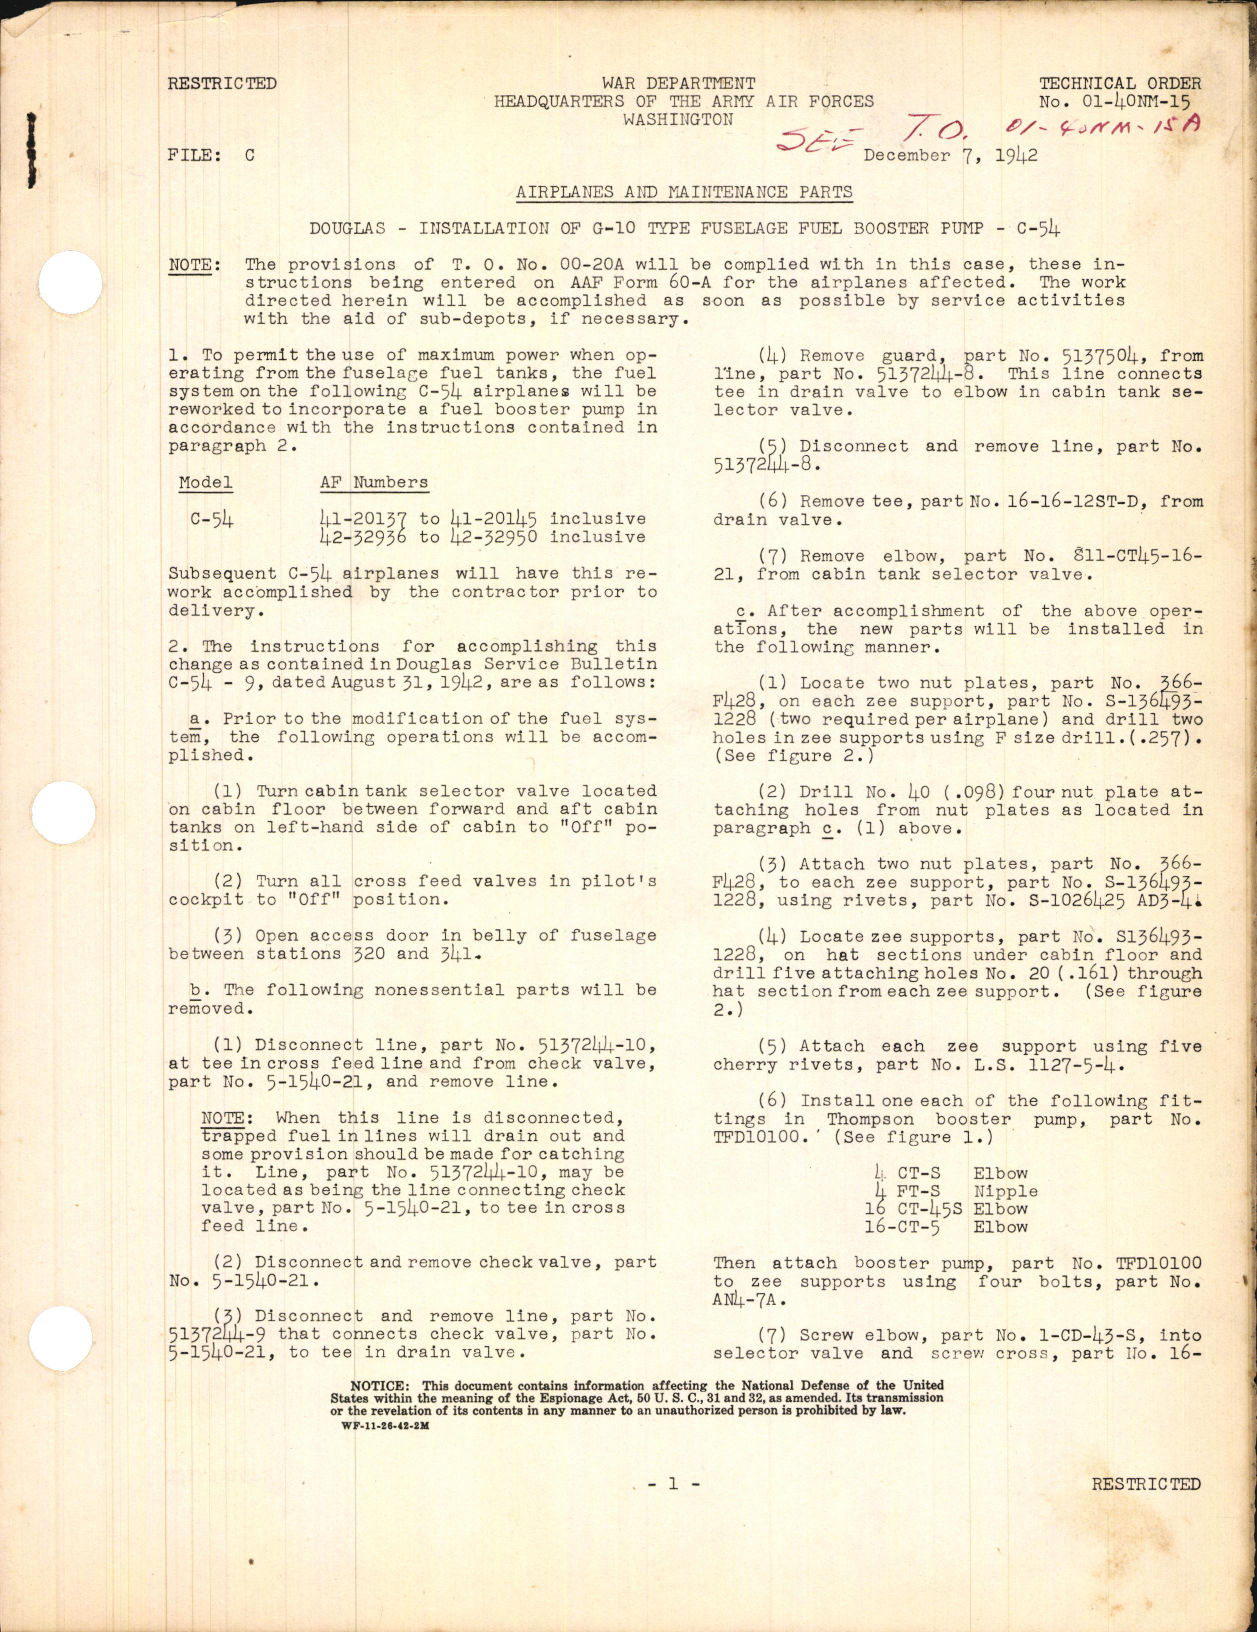 Sample page 1 from AirCorps Library document: Installation of G-10 Type Fuselage Fuel Booster Pump for C-54